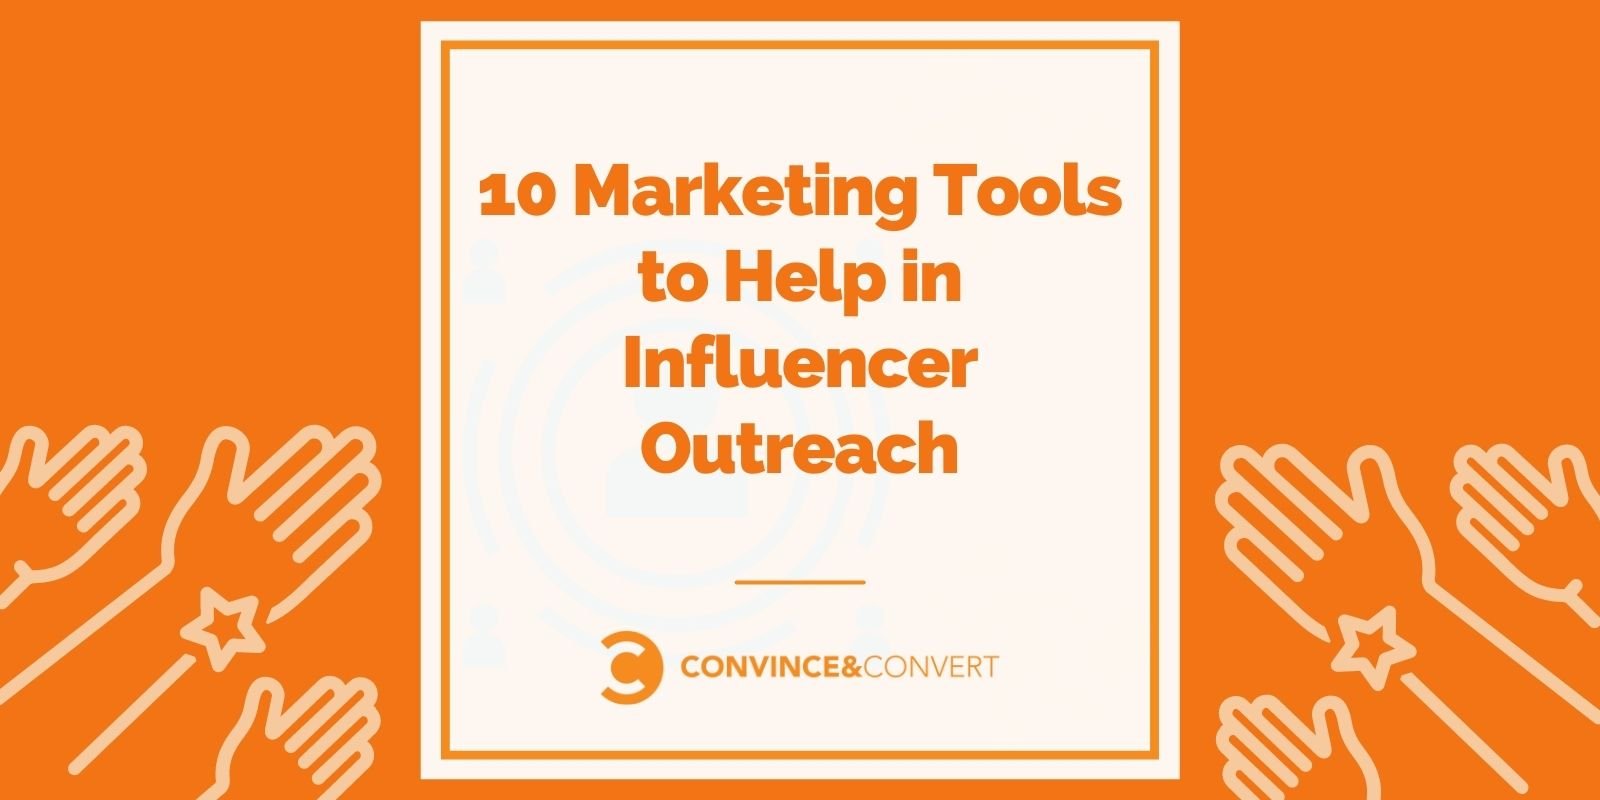 10 Marketing Tools to Relief in Influencer Outreach